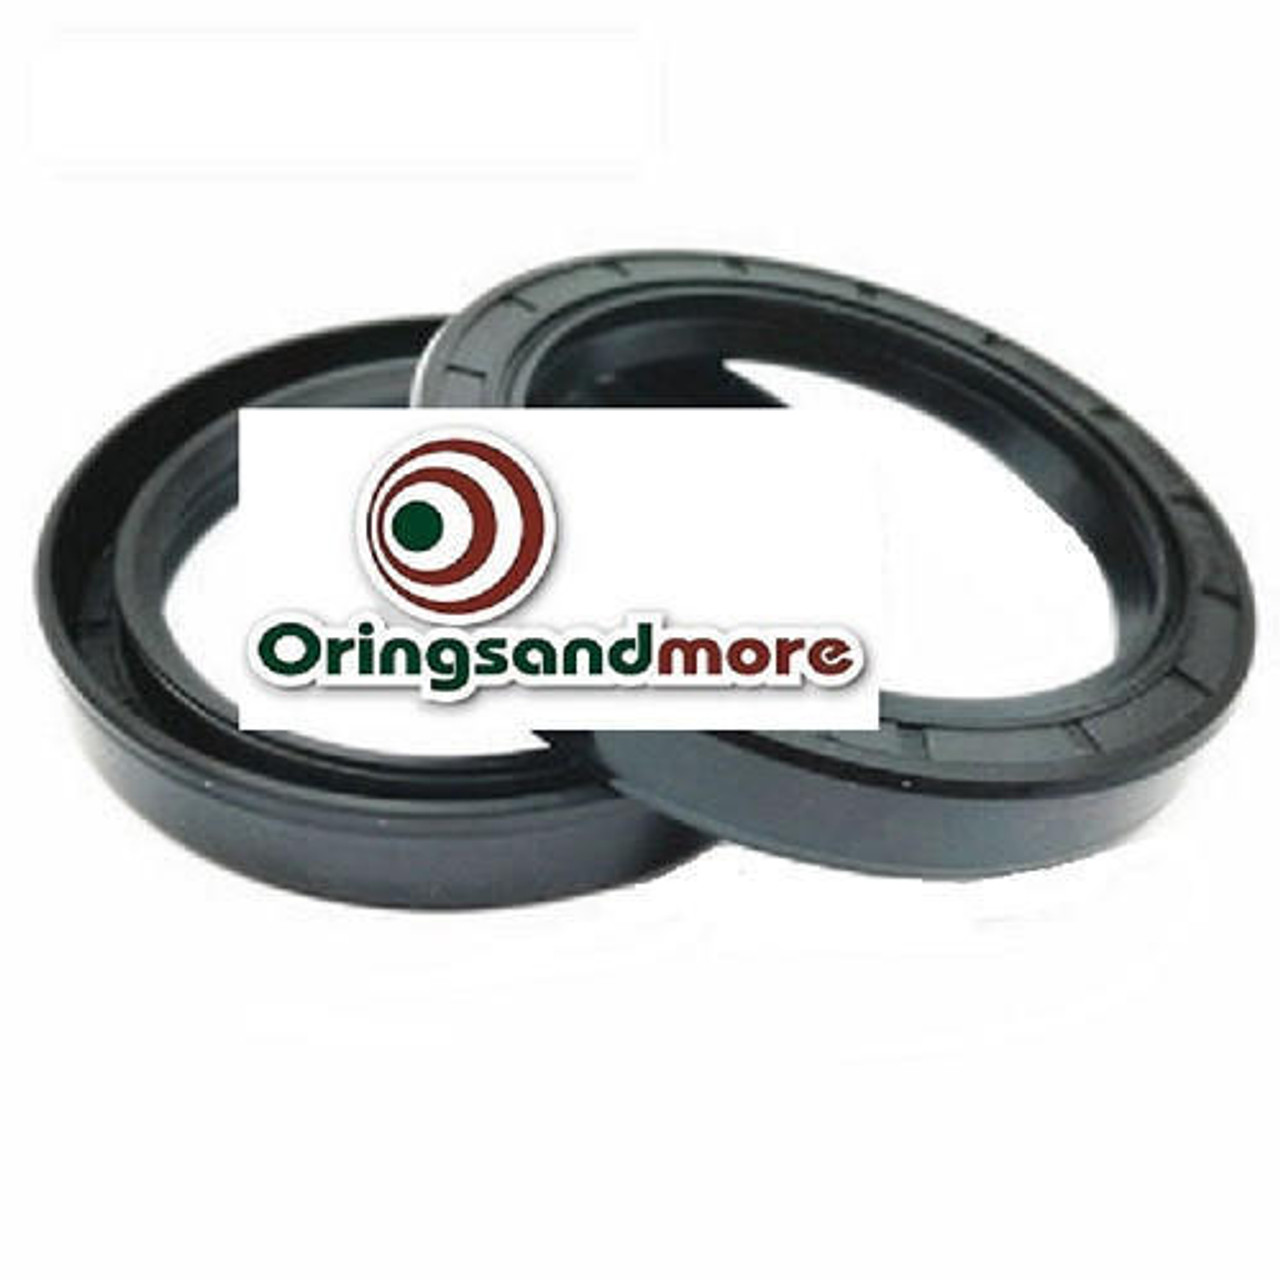 Metric Oil Shaft Seal 55 x 68 x 10mm Double Lip   Price for 1 pc